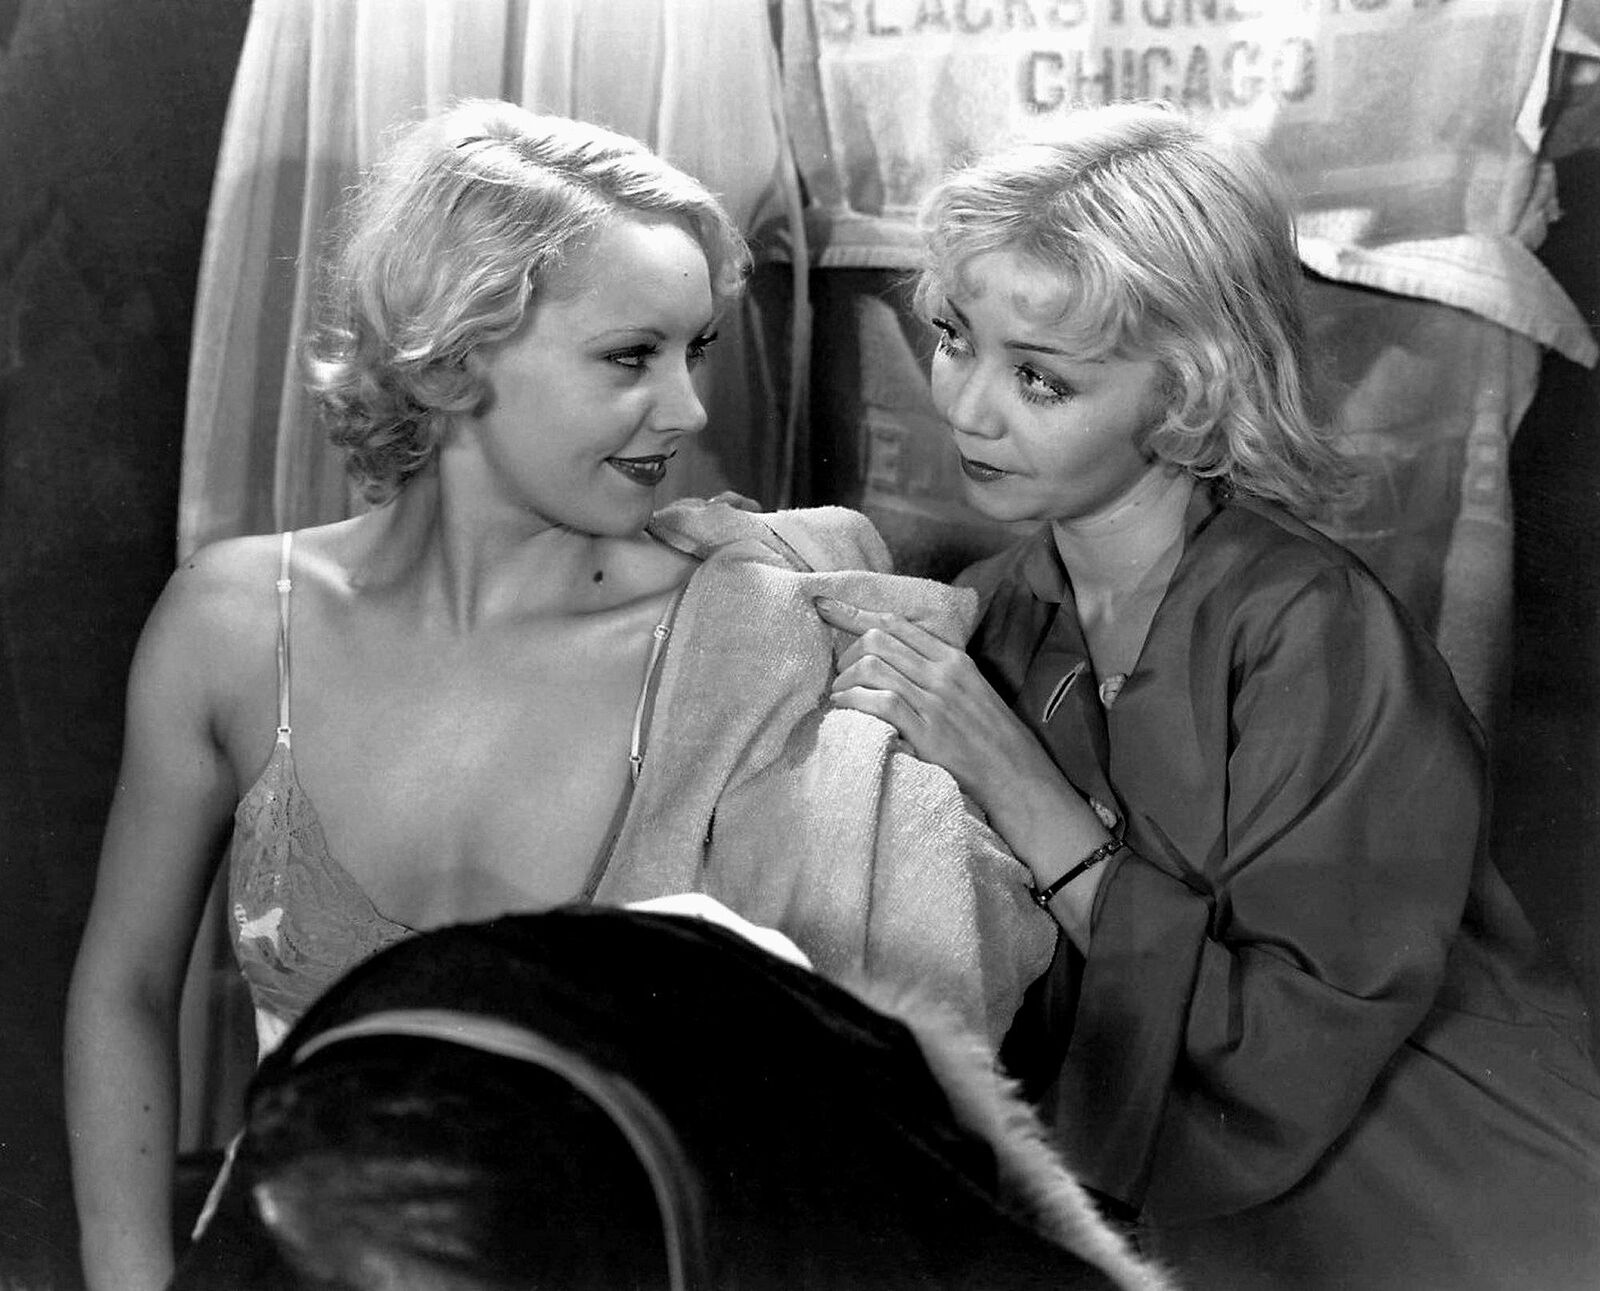 Early Cinema Favorites ALICE WHITE & JUNE KNIGHT Photo   (227-A)